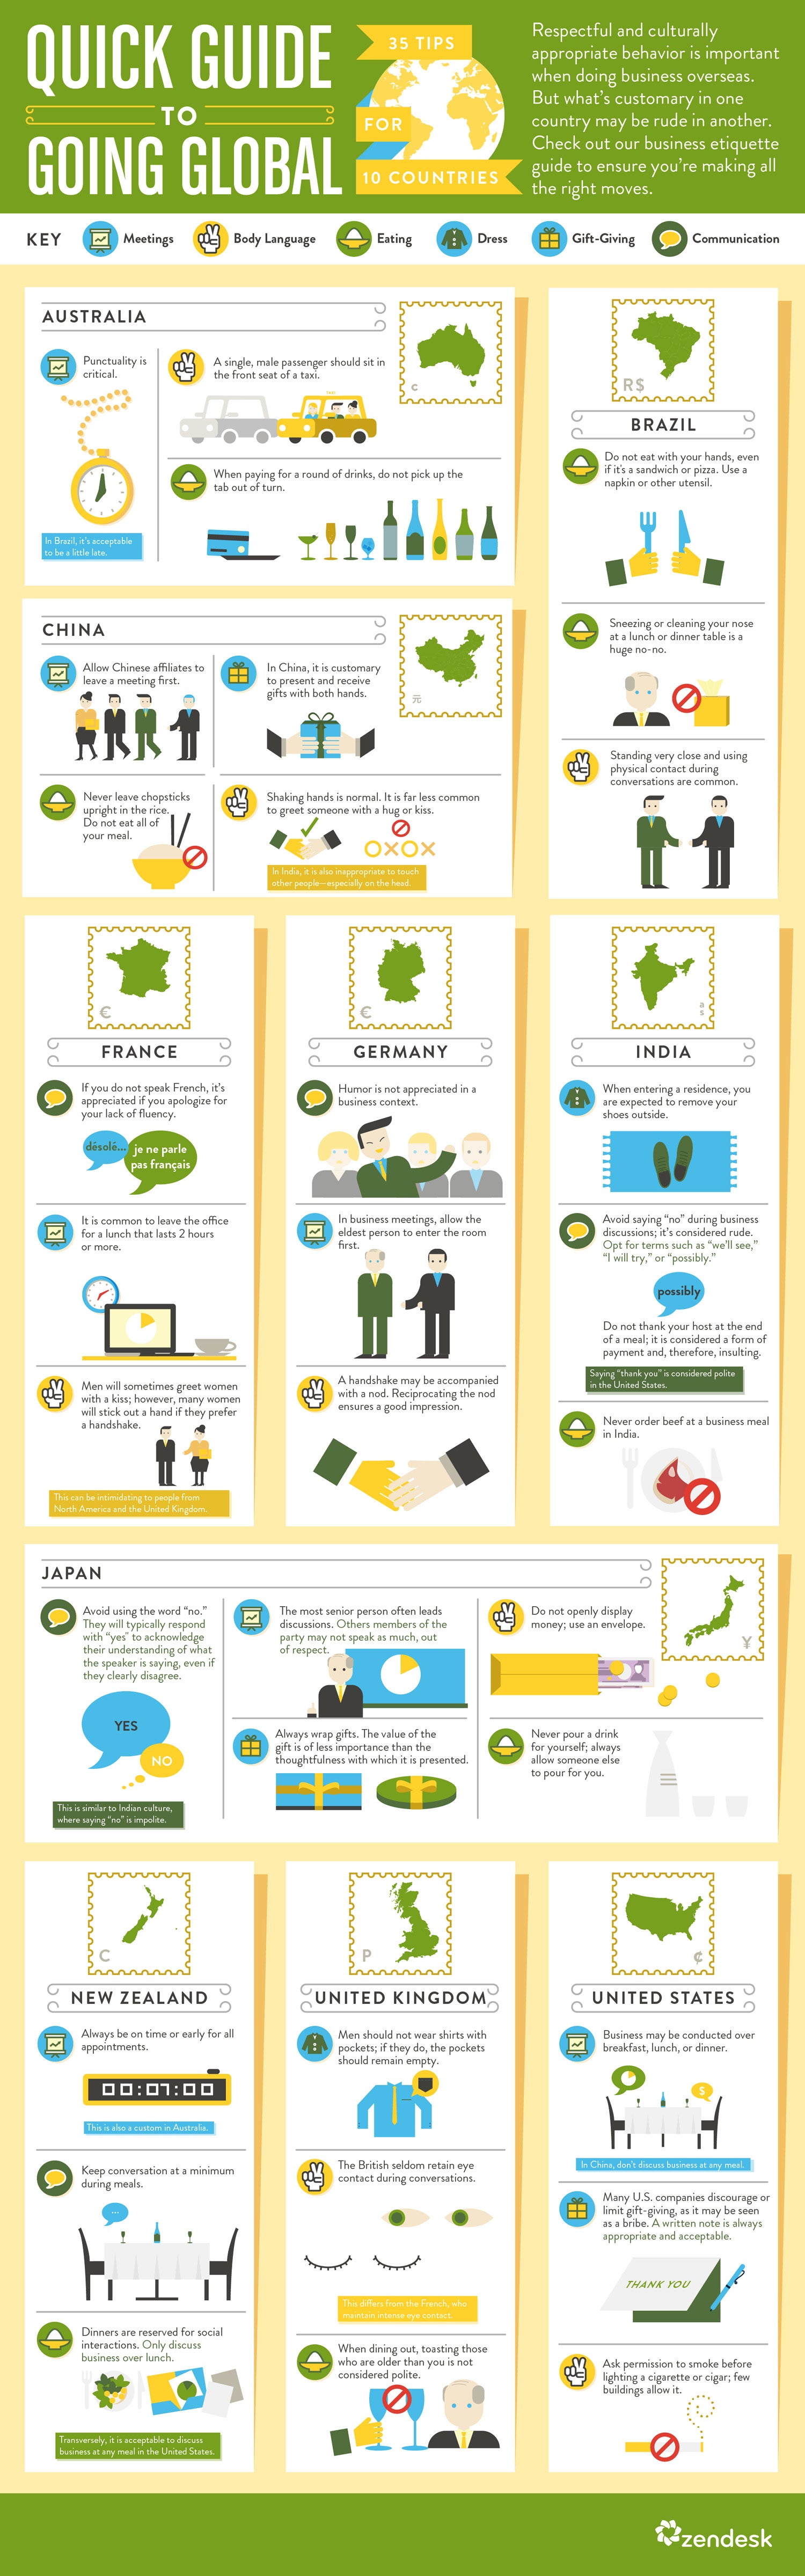 35 Tips on How Not to Offend Your International Business Partners (Infographic)